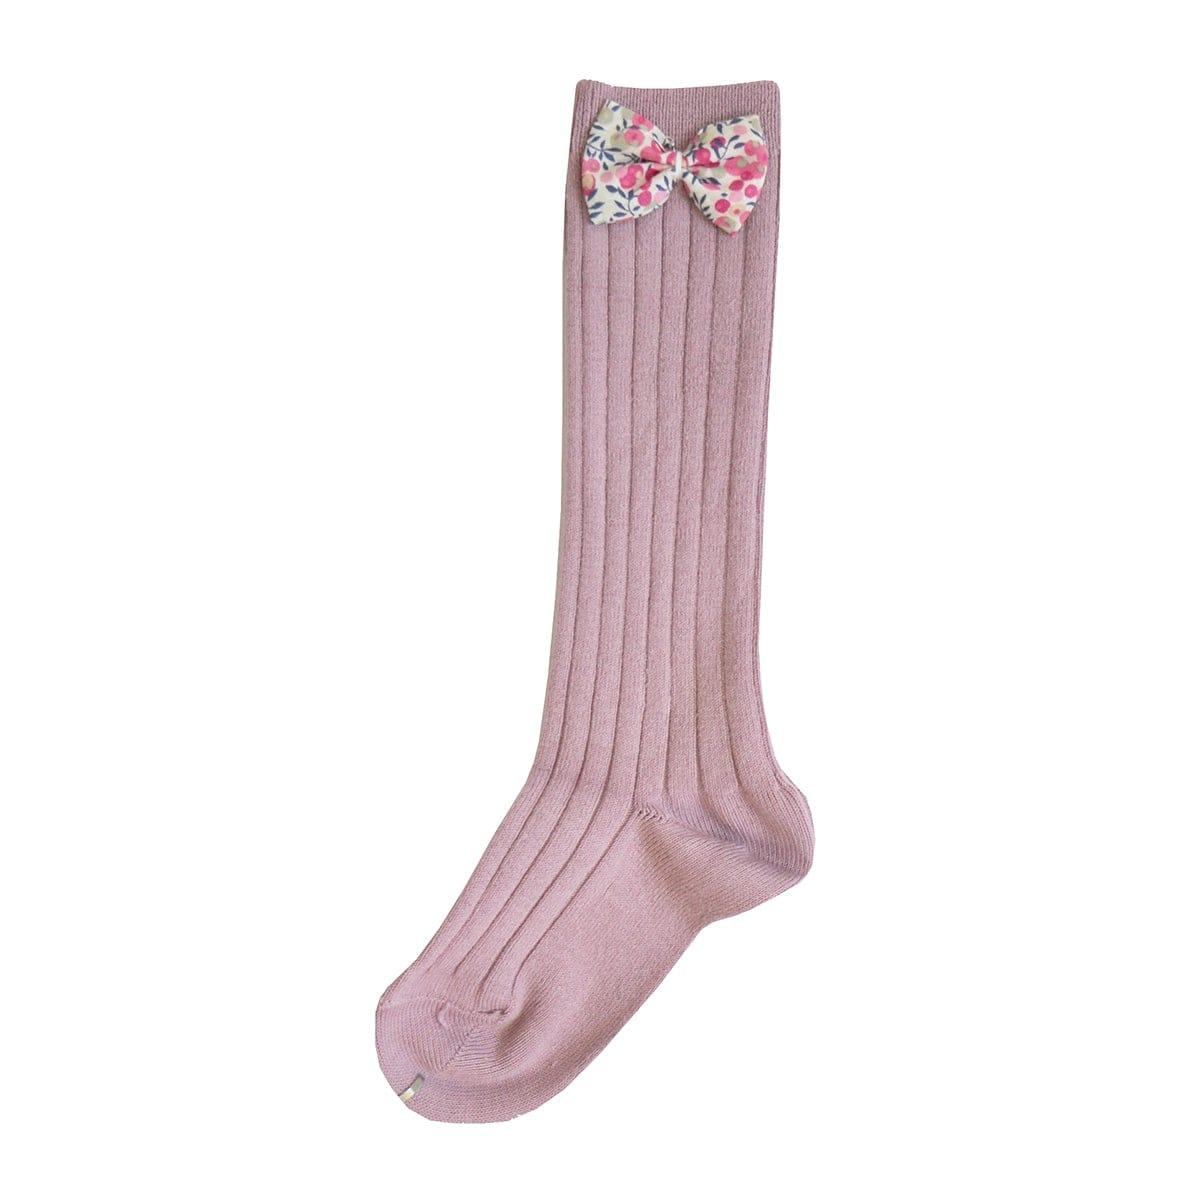 Lavender Knee High Socks with Bow made with Liberty Fabric WILTSHIRE BUD MAGENTA - Coco & Wolf